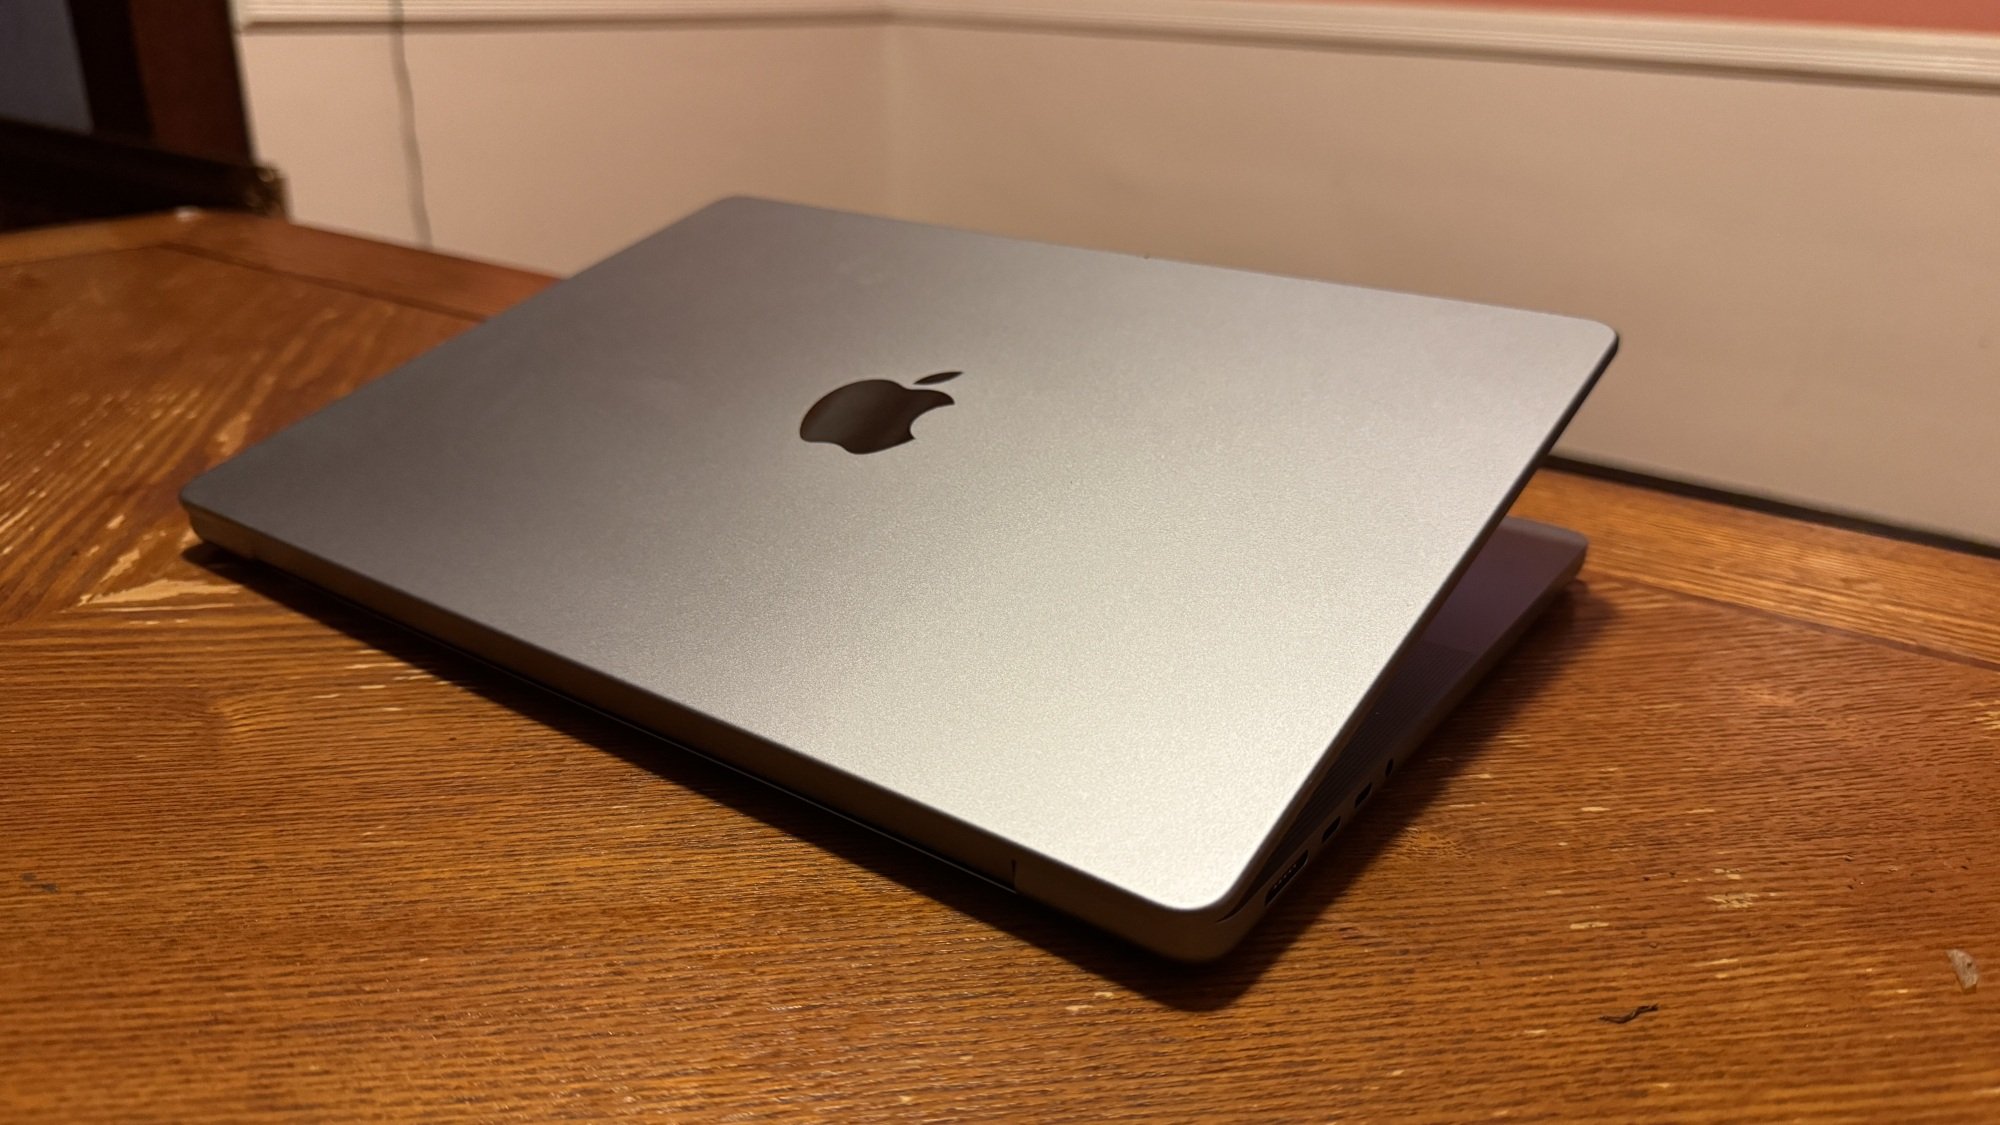 14-inch MacBook Pro M3 on a table